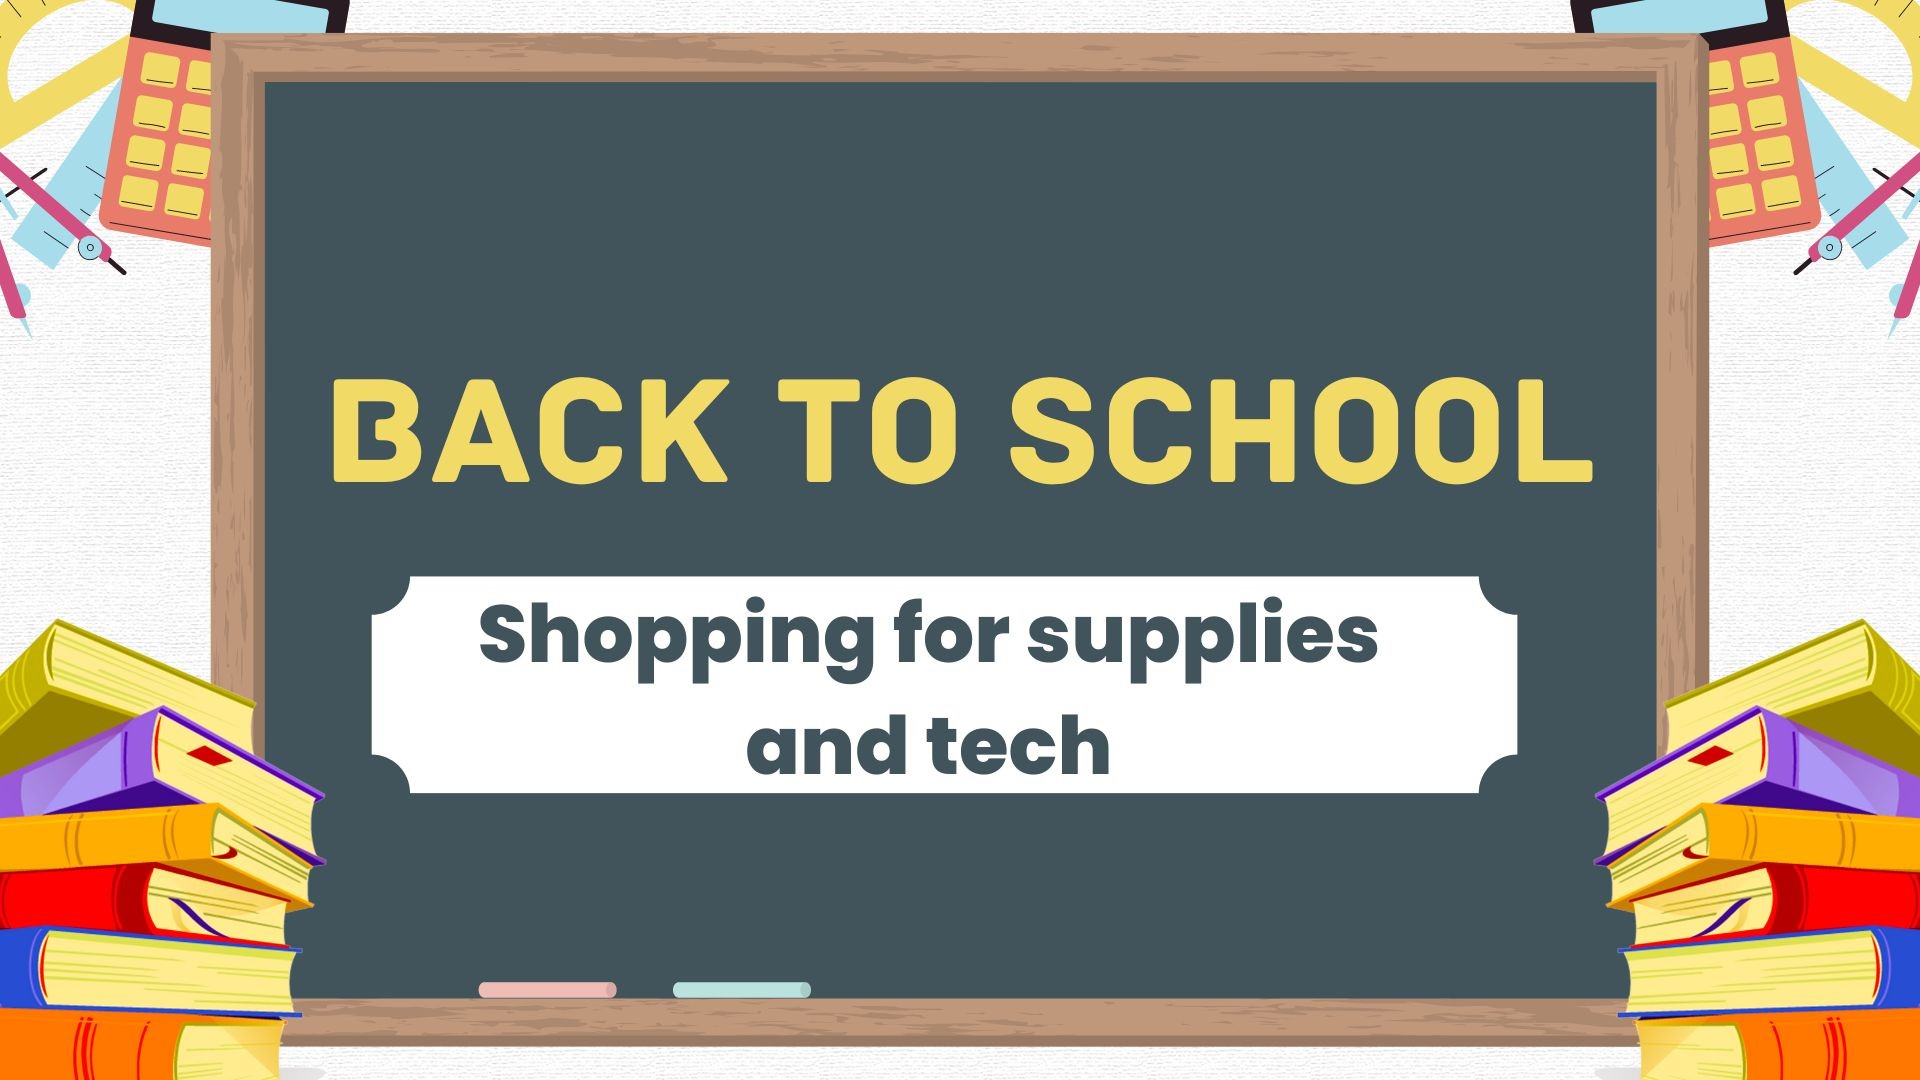 Back to School Supplies and More!